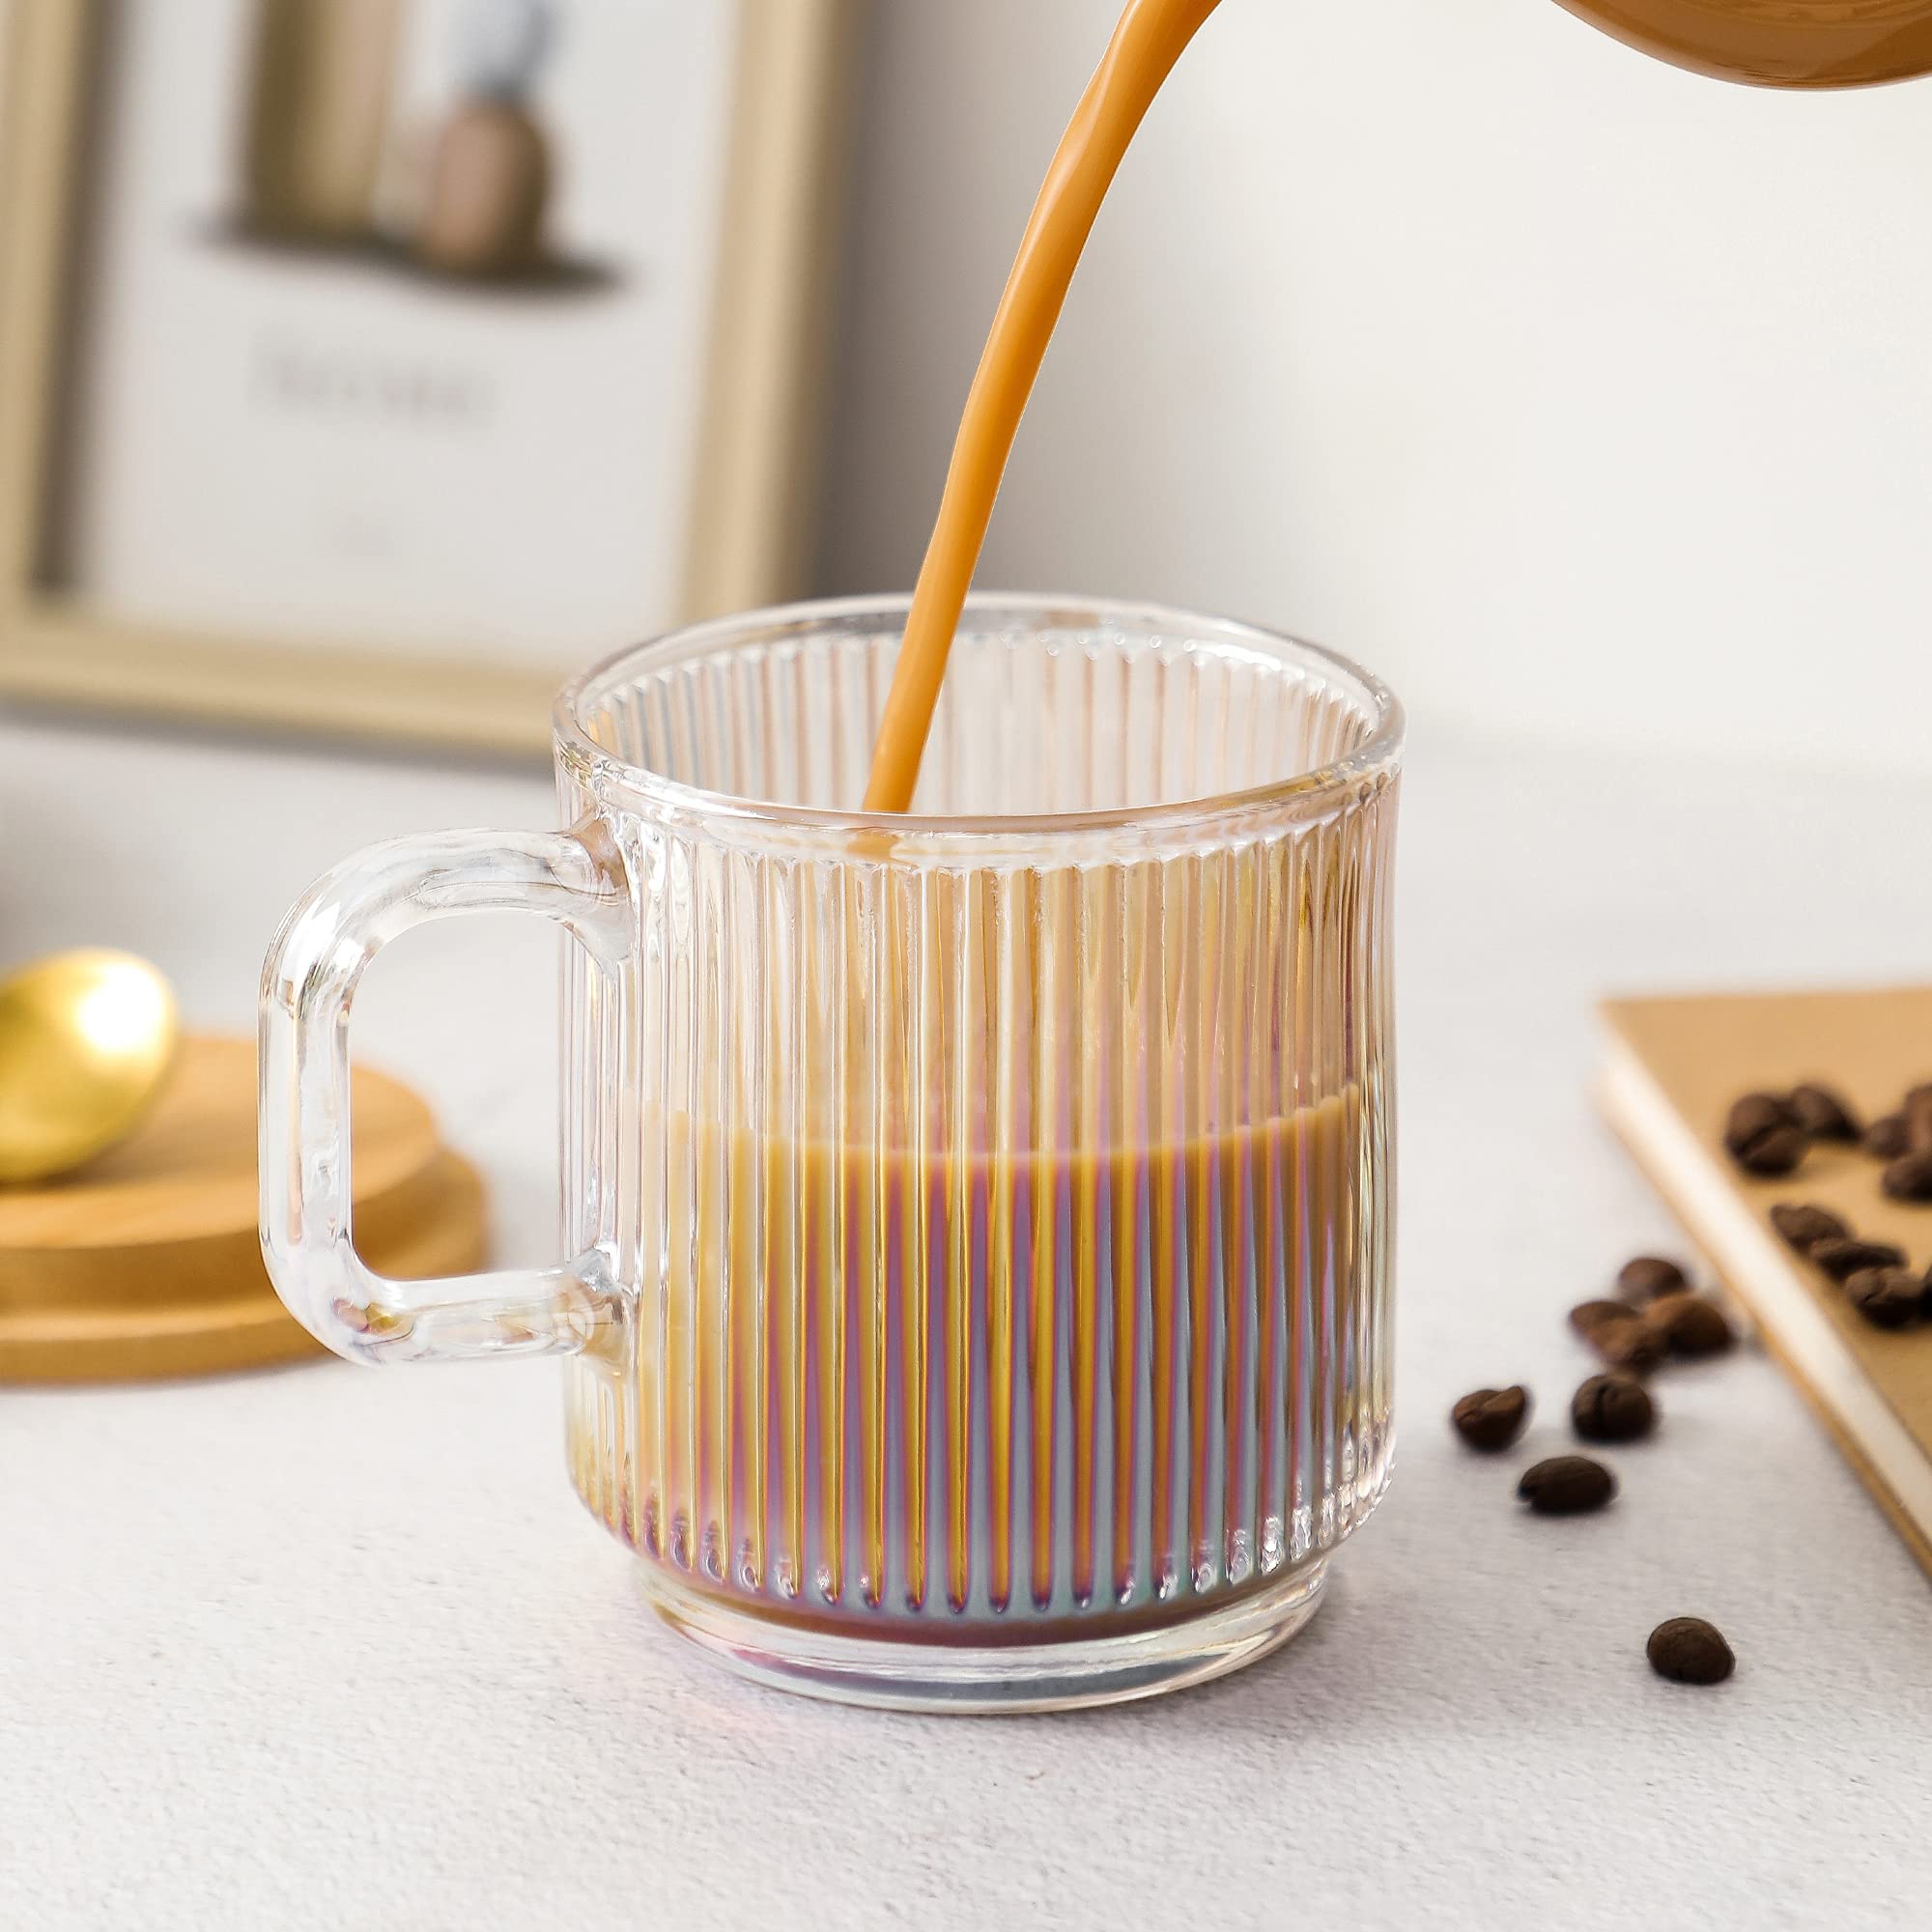 Lysenn Iridescent Glass Coffee Mug with Lid - Premium Classical Vertical Stripes Glass Tea Cup - for |Latte|Tea|Chocolate|Juice|Water| - Unleaded - Bamboo Lid - 12.5 Ounces